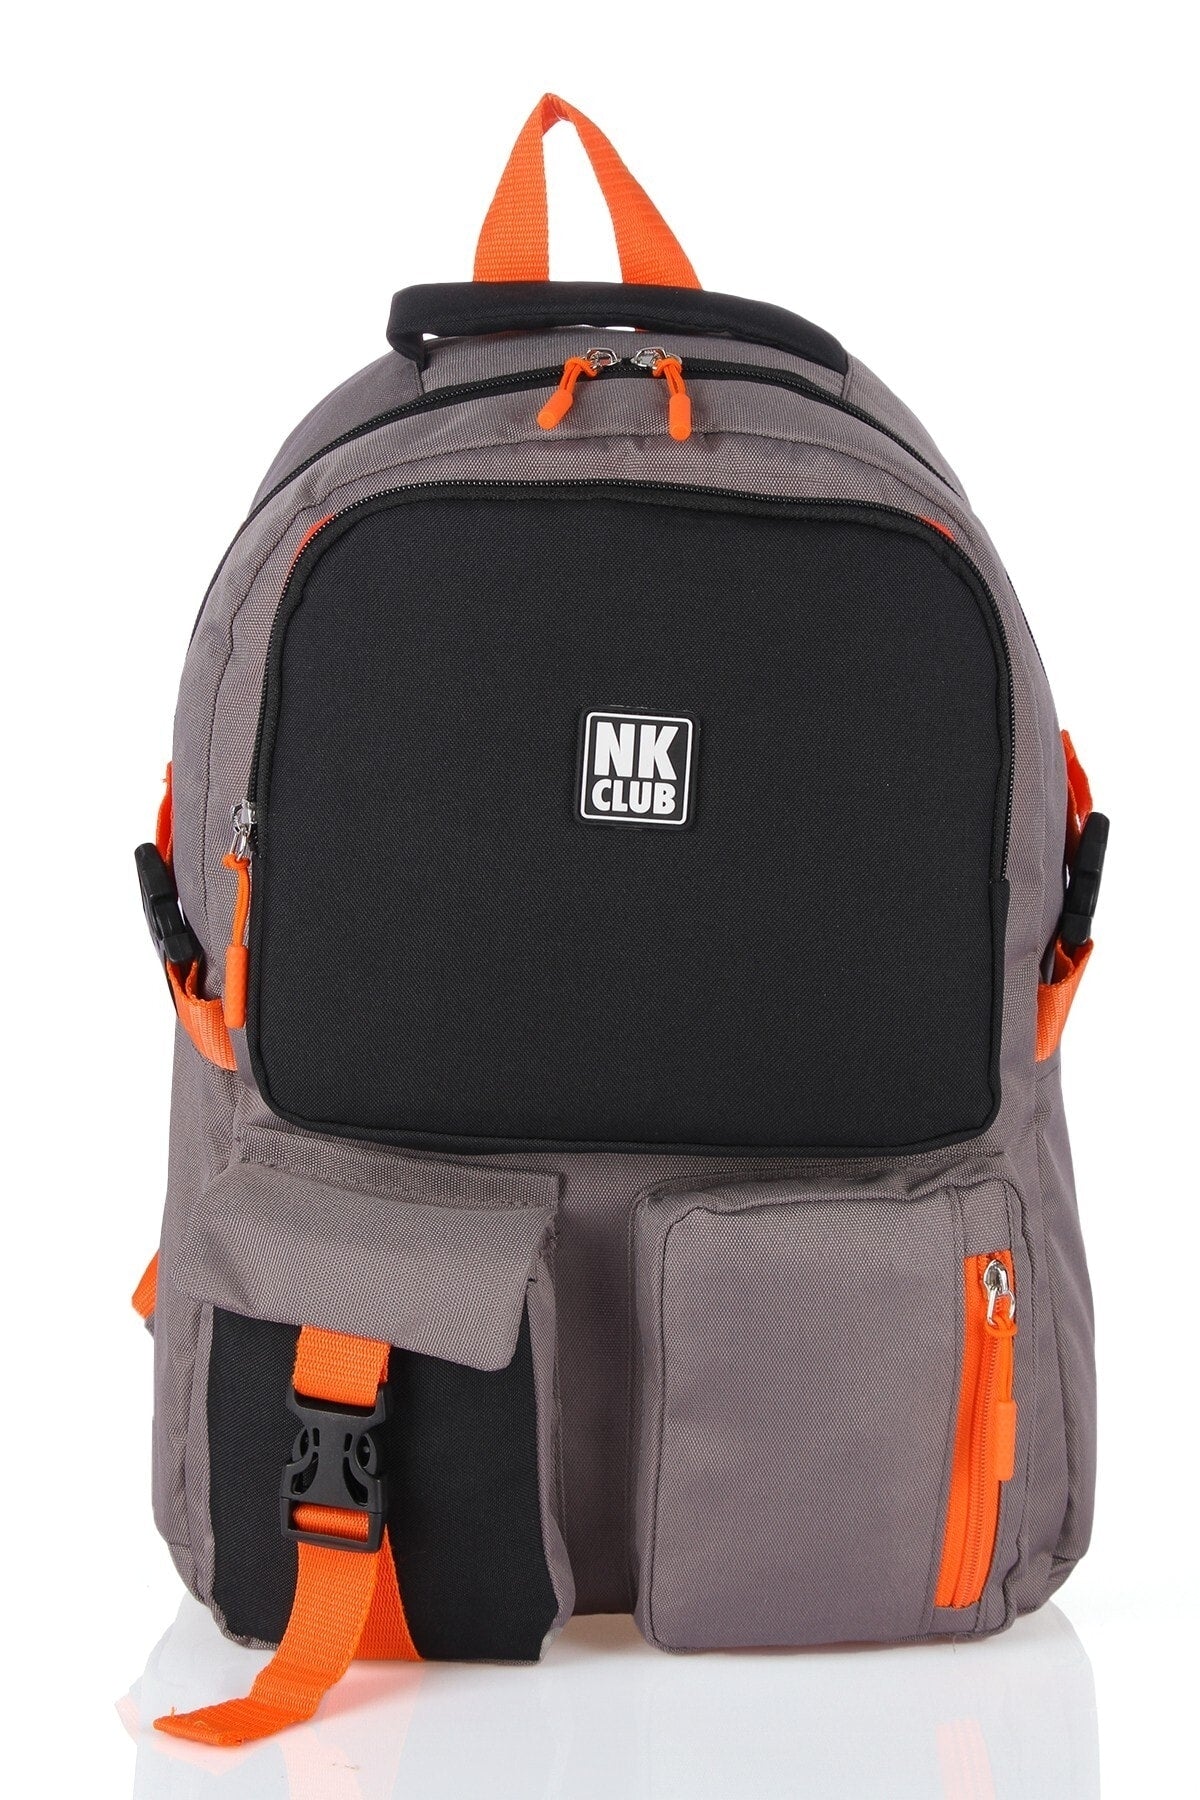 Hkn 9012 Primary School Backpack School Bag Multi Compartment Black